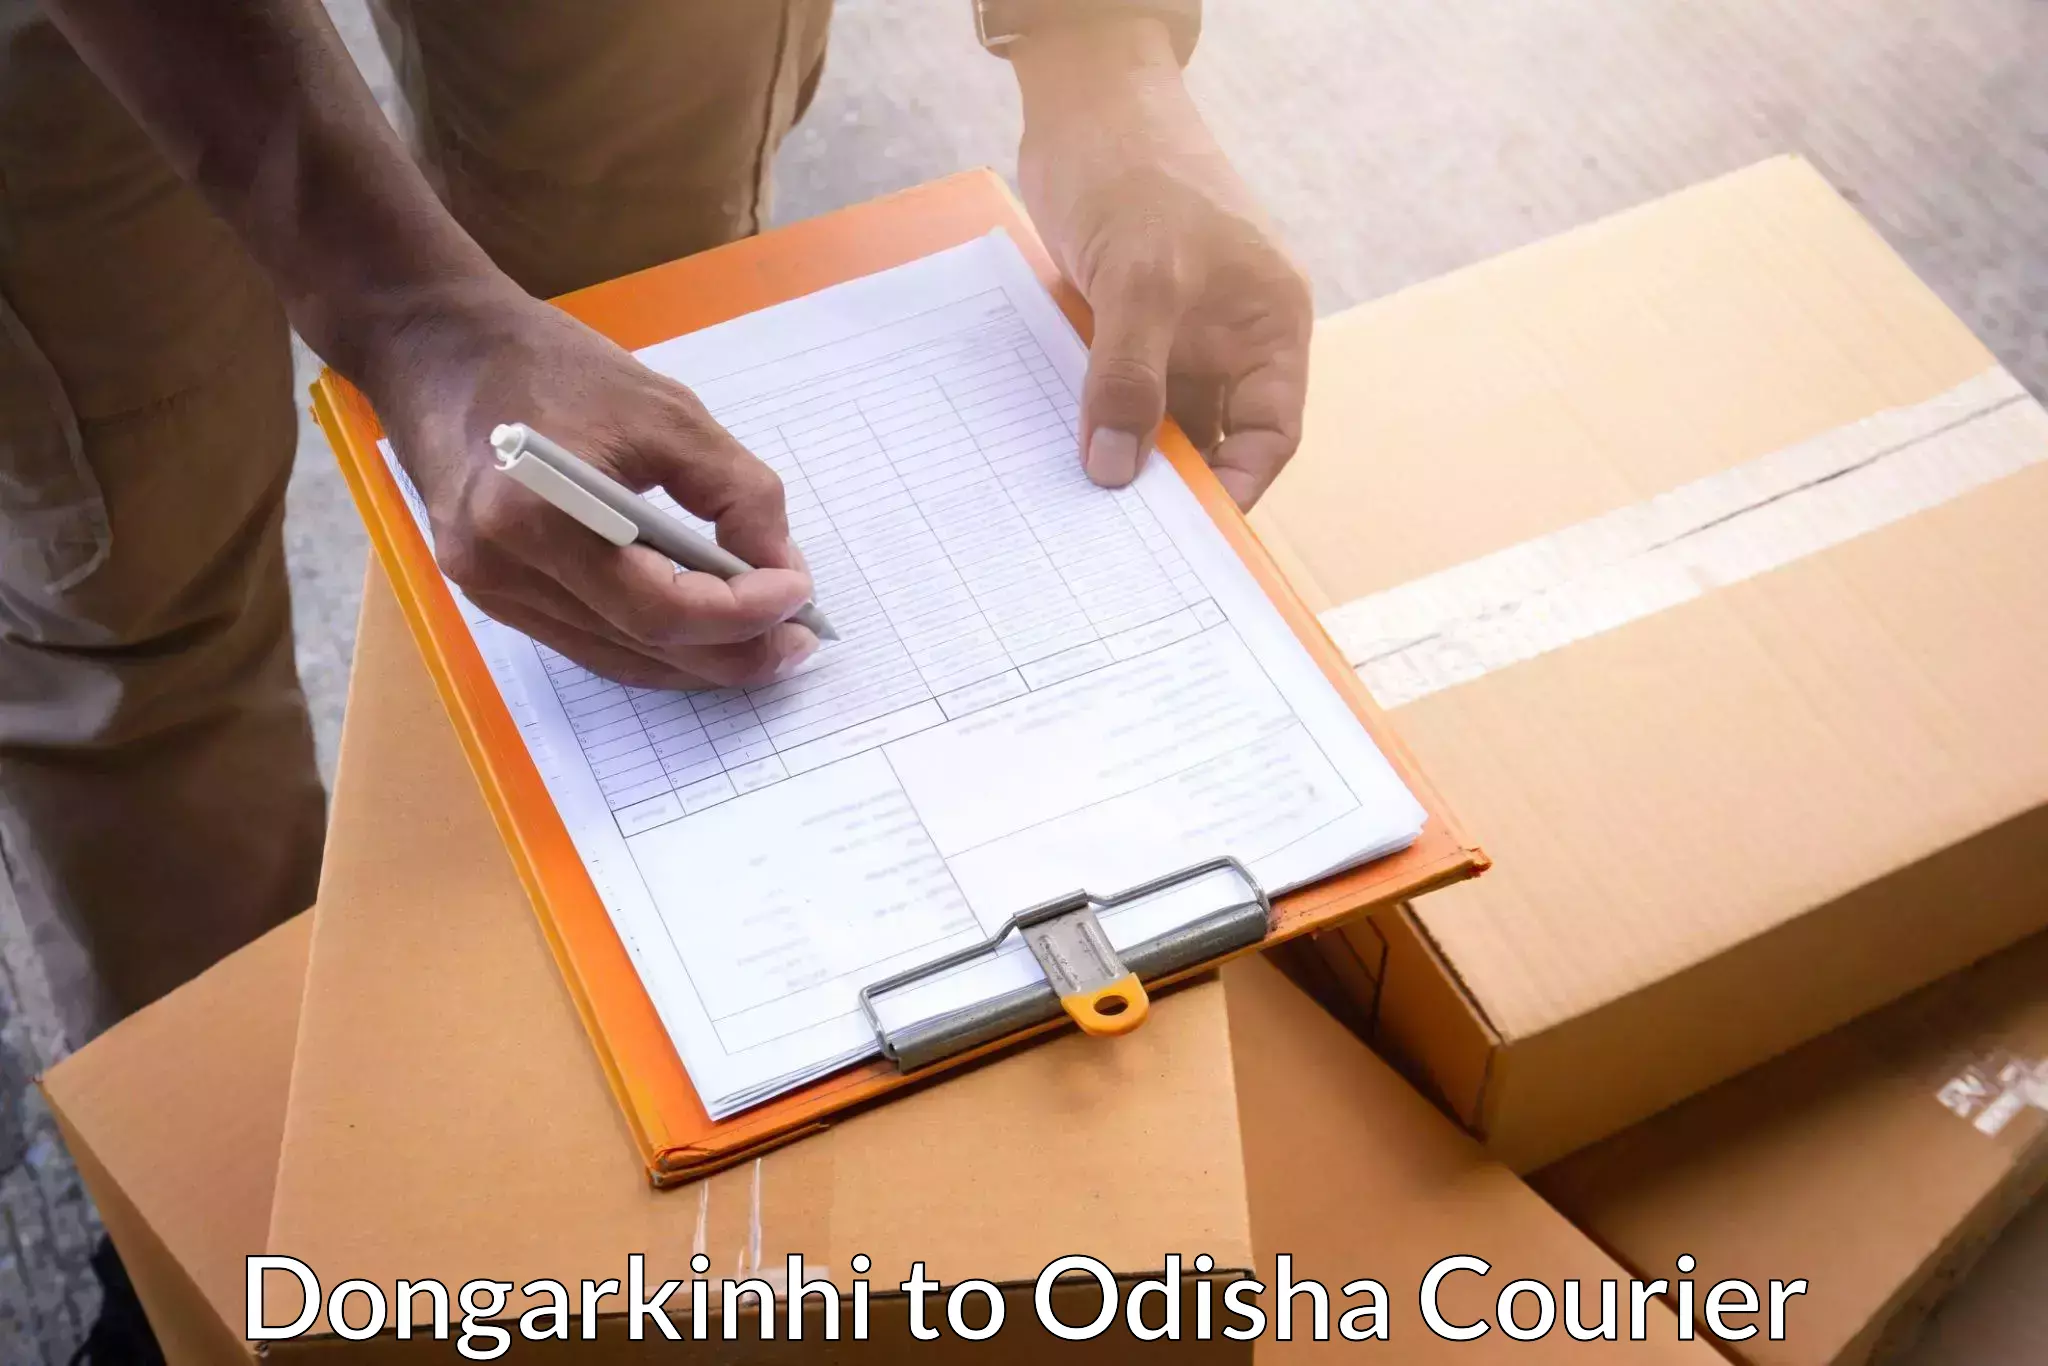 Easy access courier services in Dongarkinhi to Berhampur Ganjam